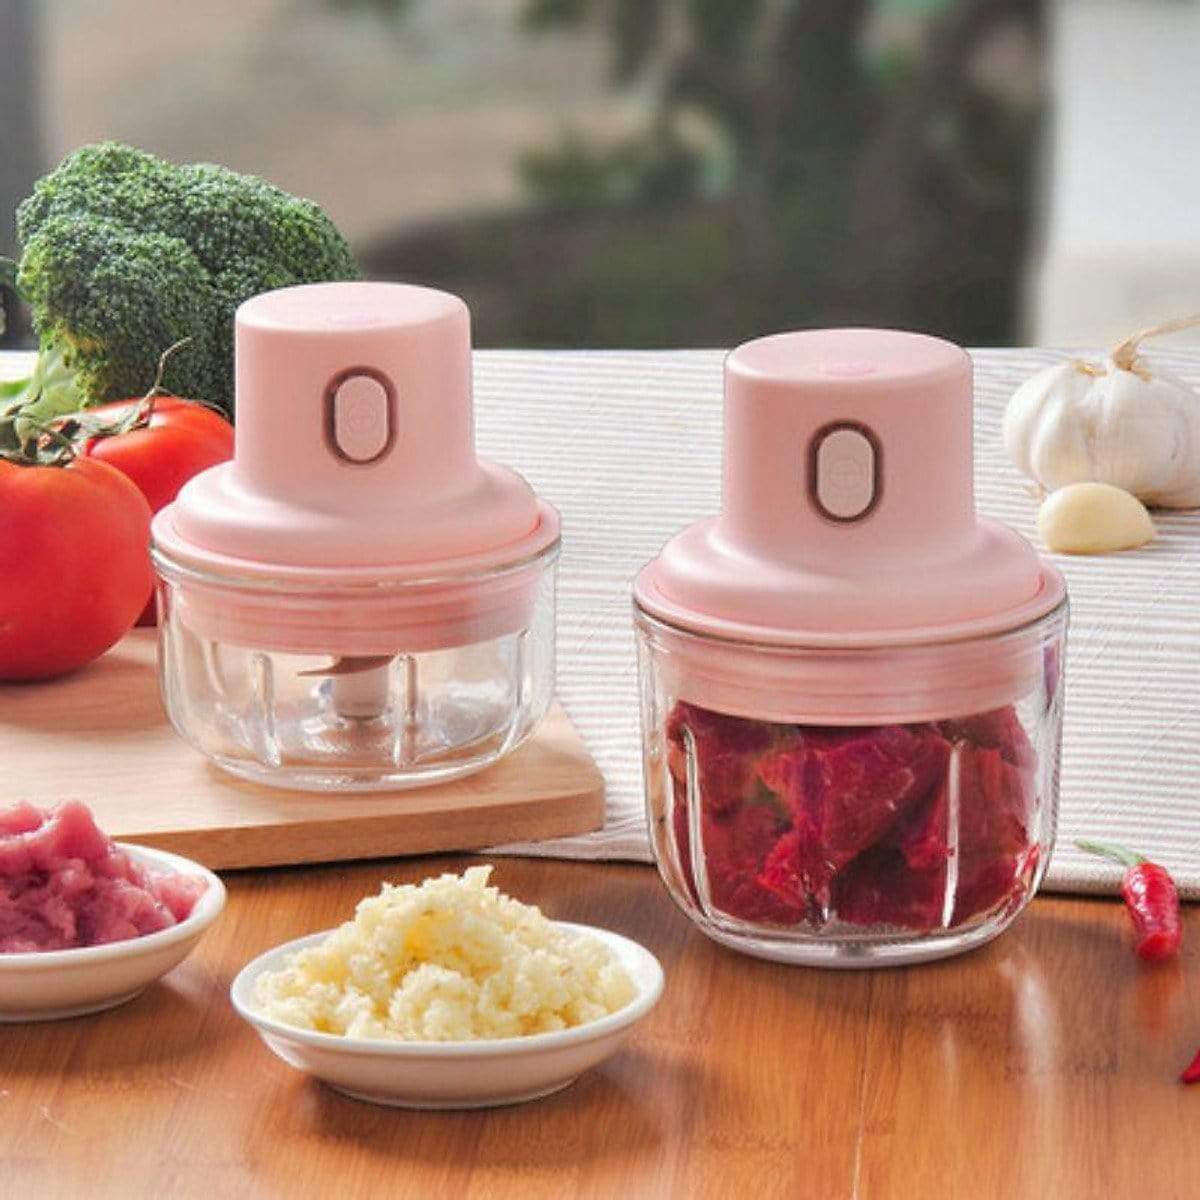 Hassle-Free Onion Chopping with a Gigawatts Electric Food Chopper